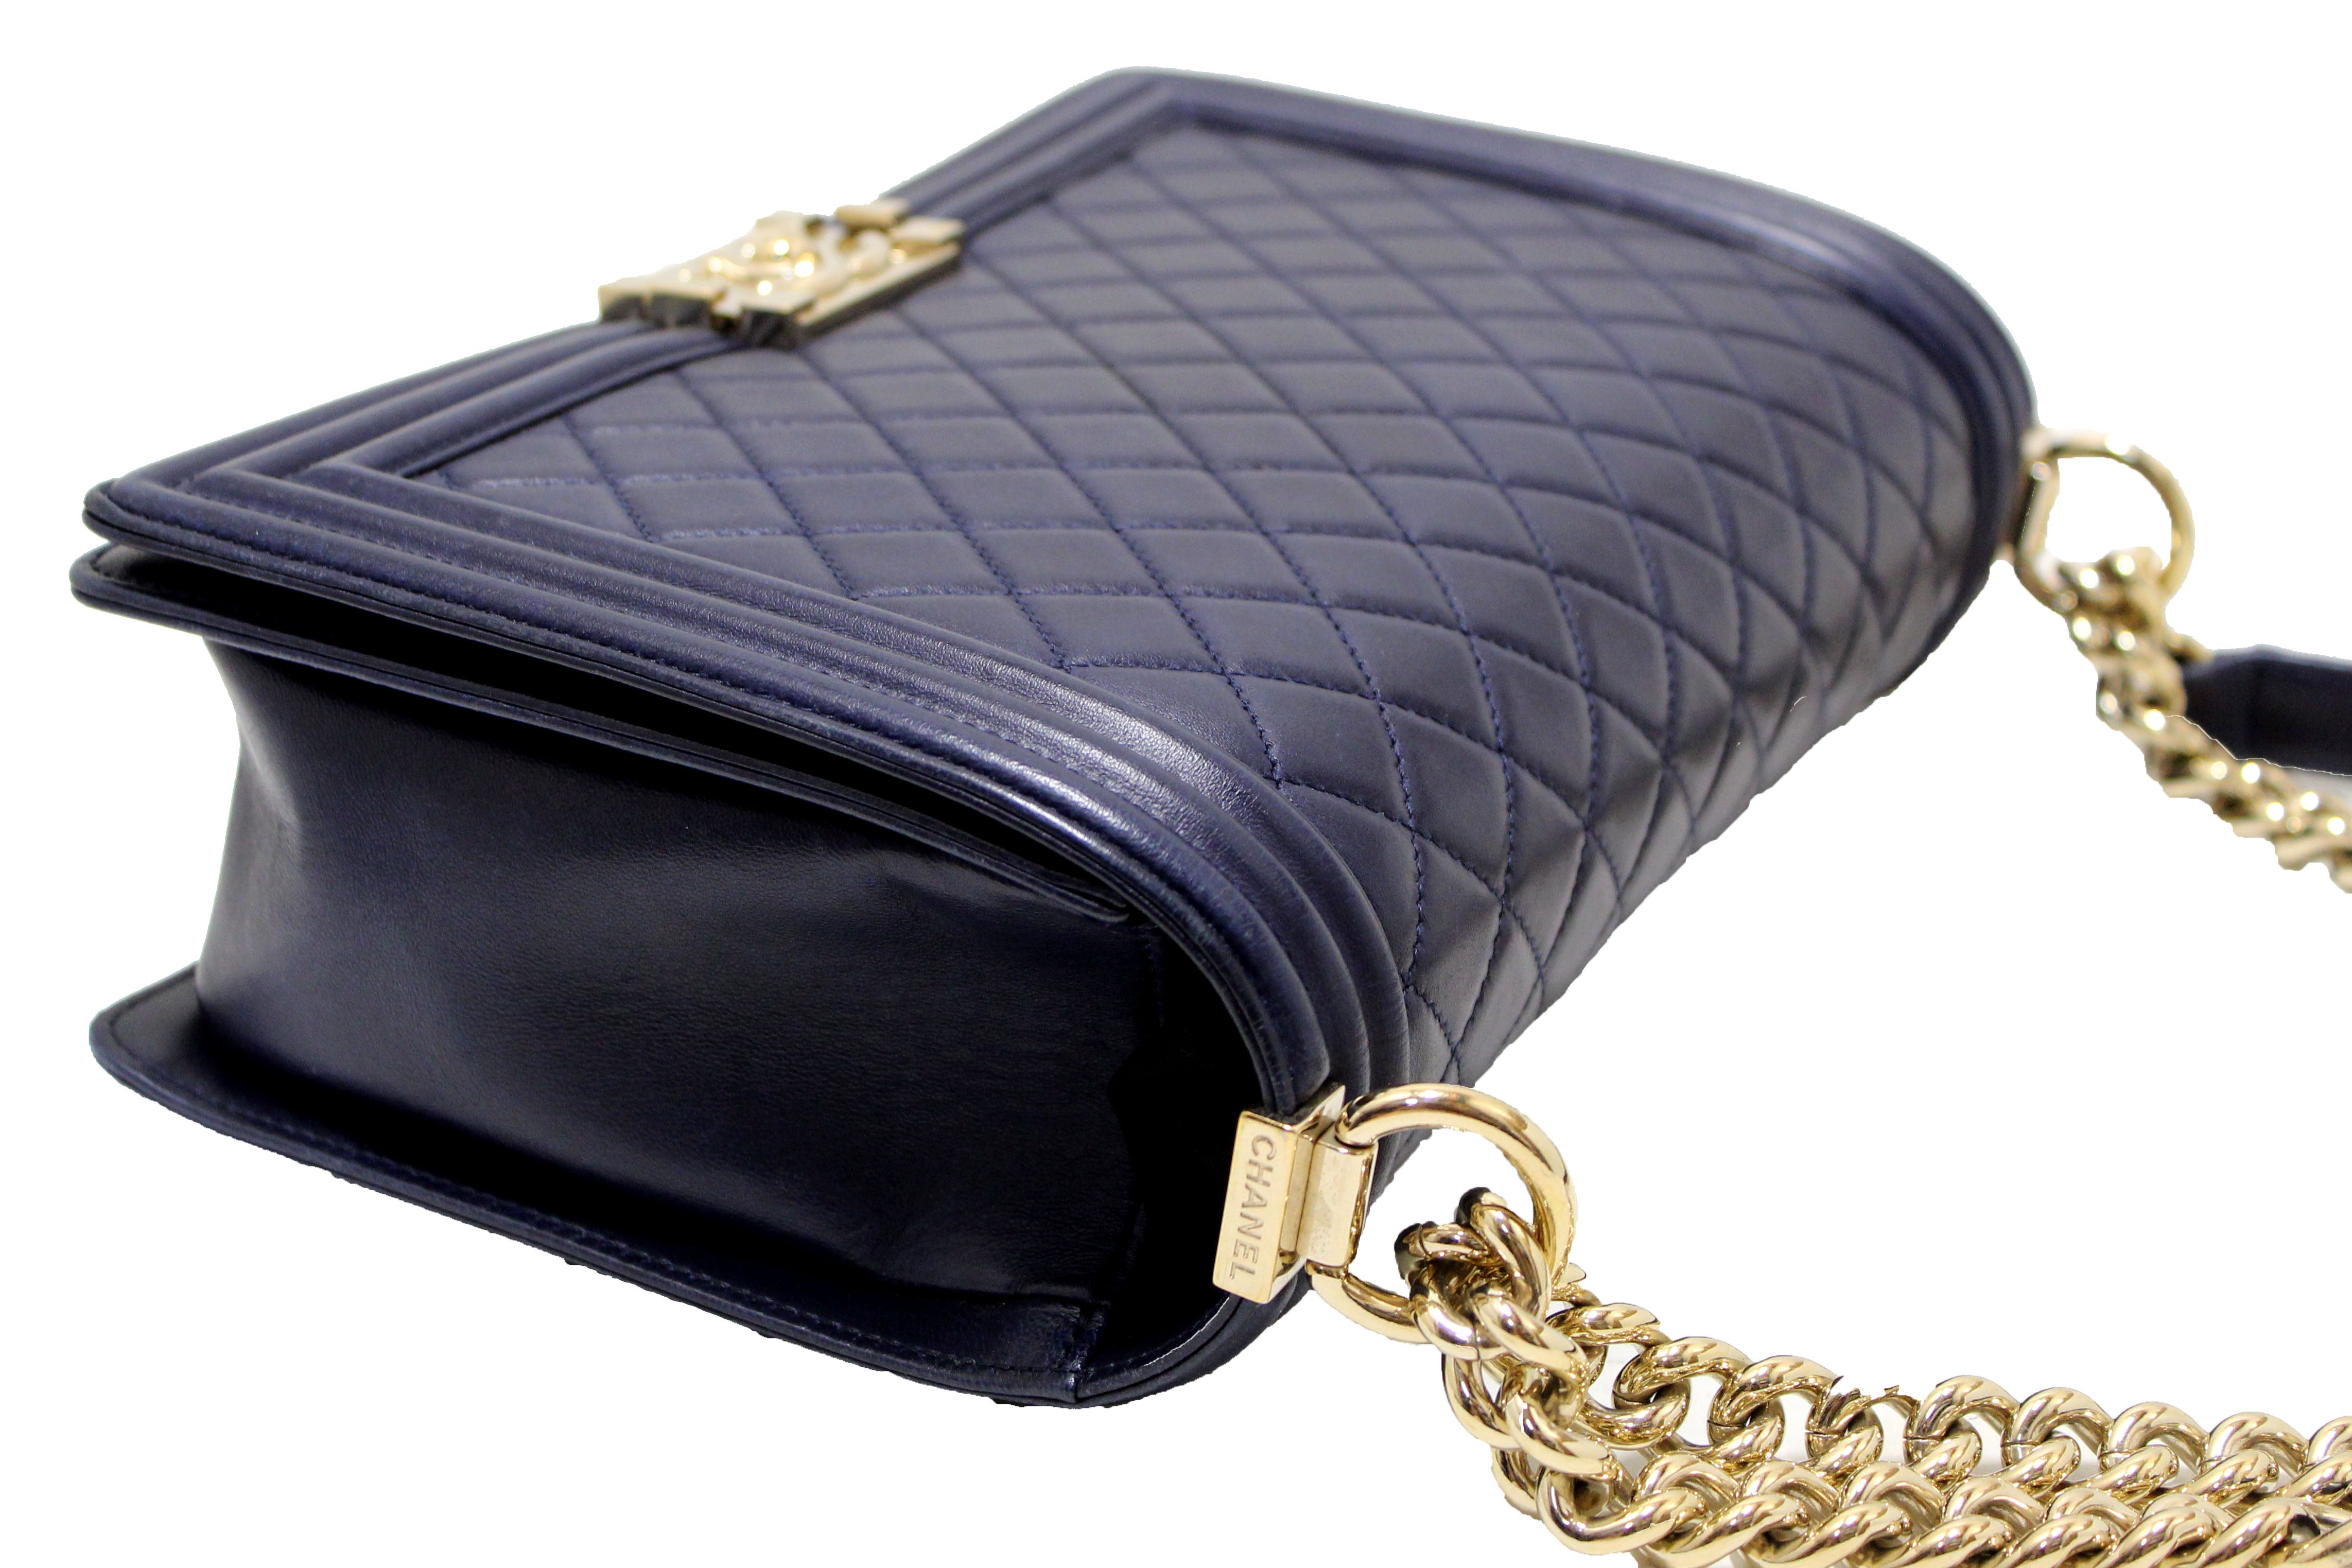 Authentic Chanel Blue Quilted Lambskin Leather New Medium Boy Shoulder Bag